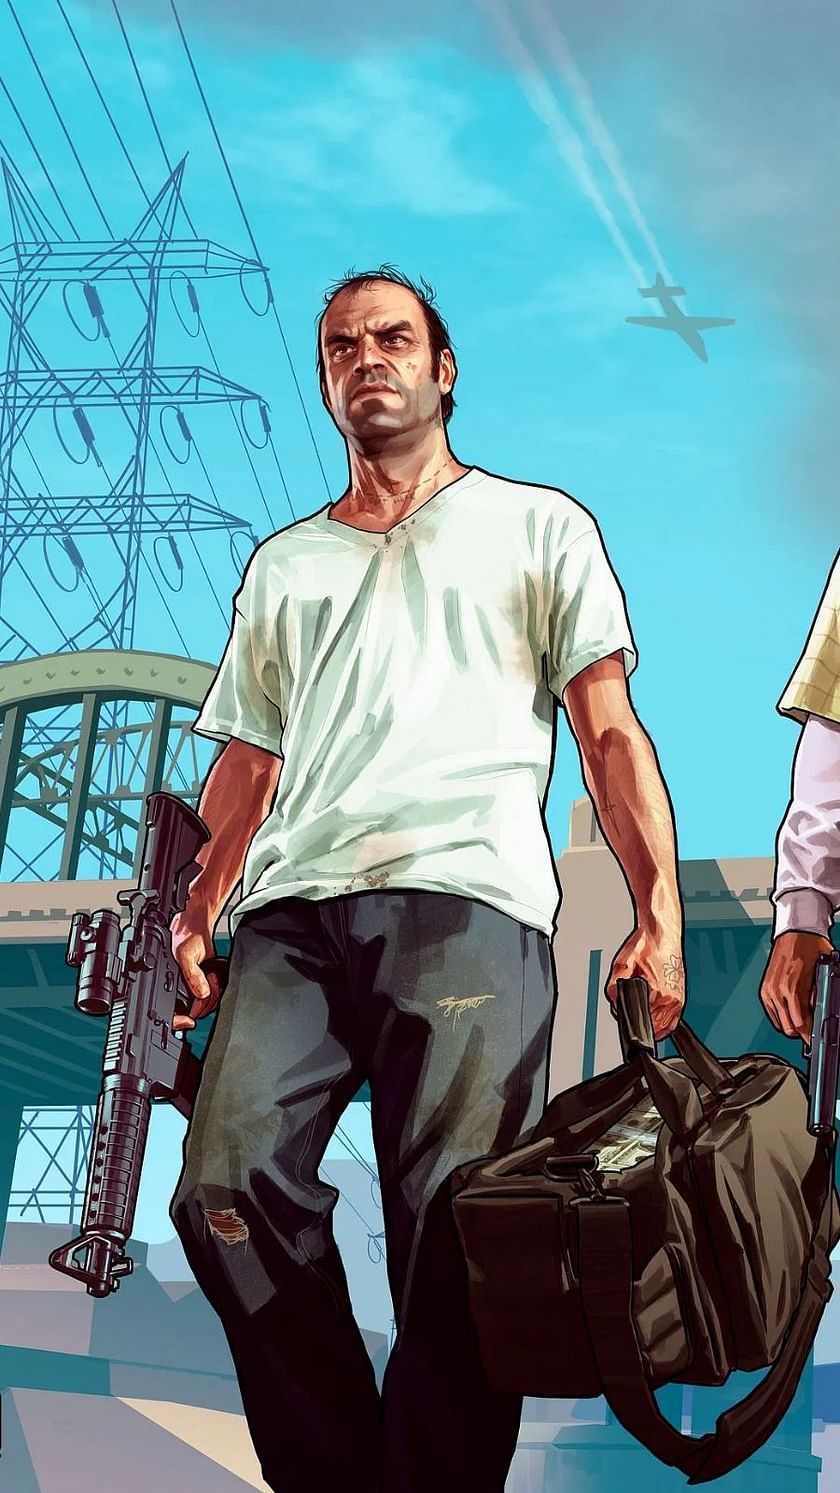 10 Best Grand Theft Auto Games Of All Time